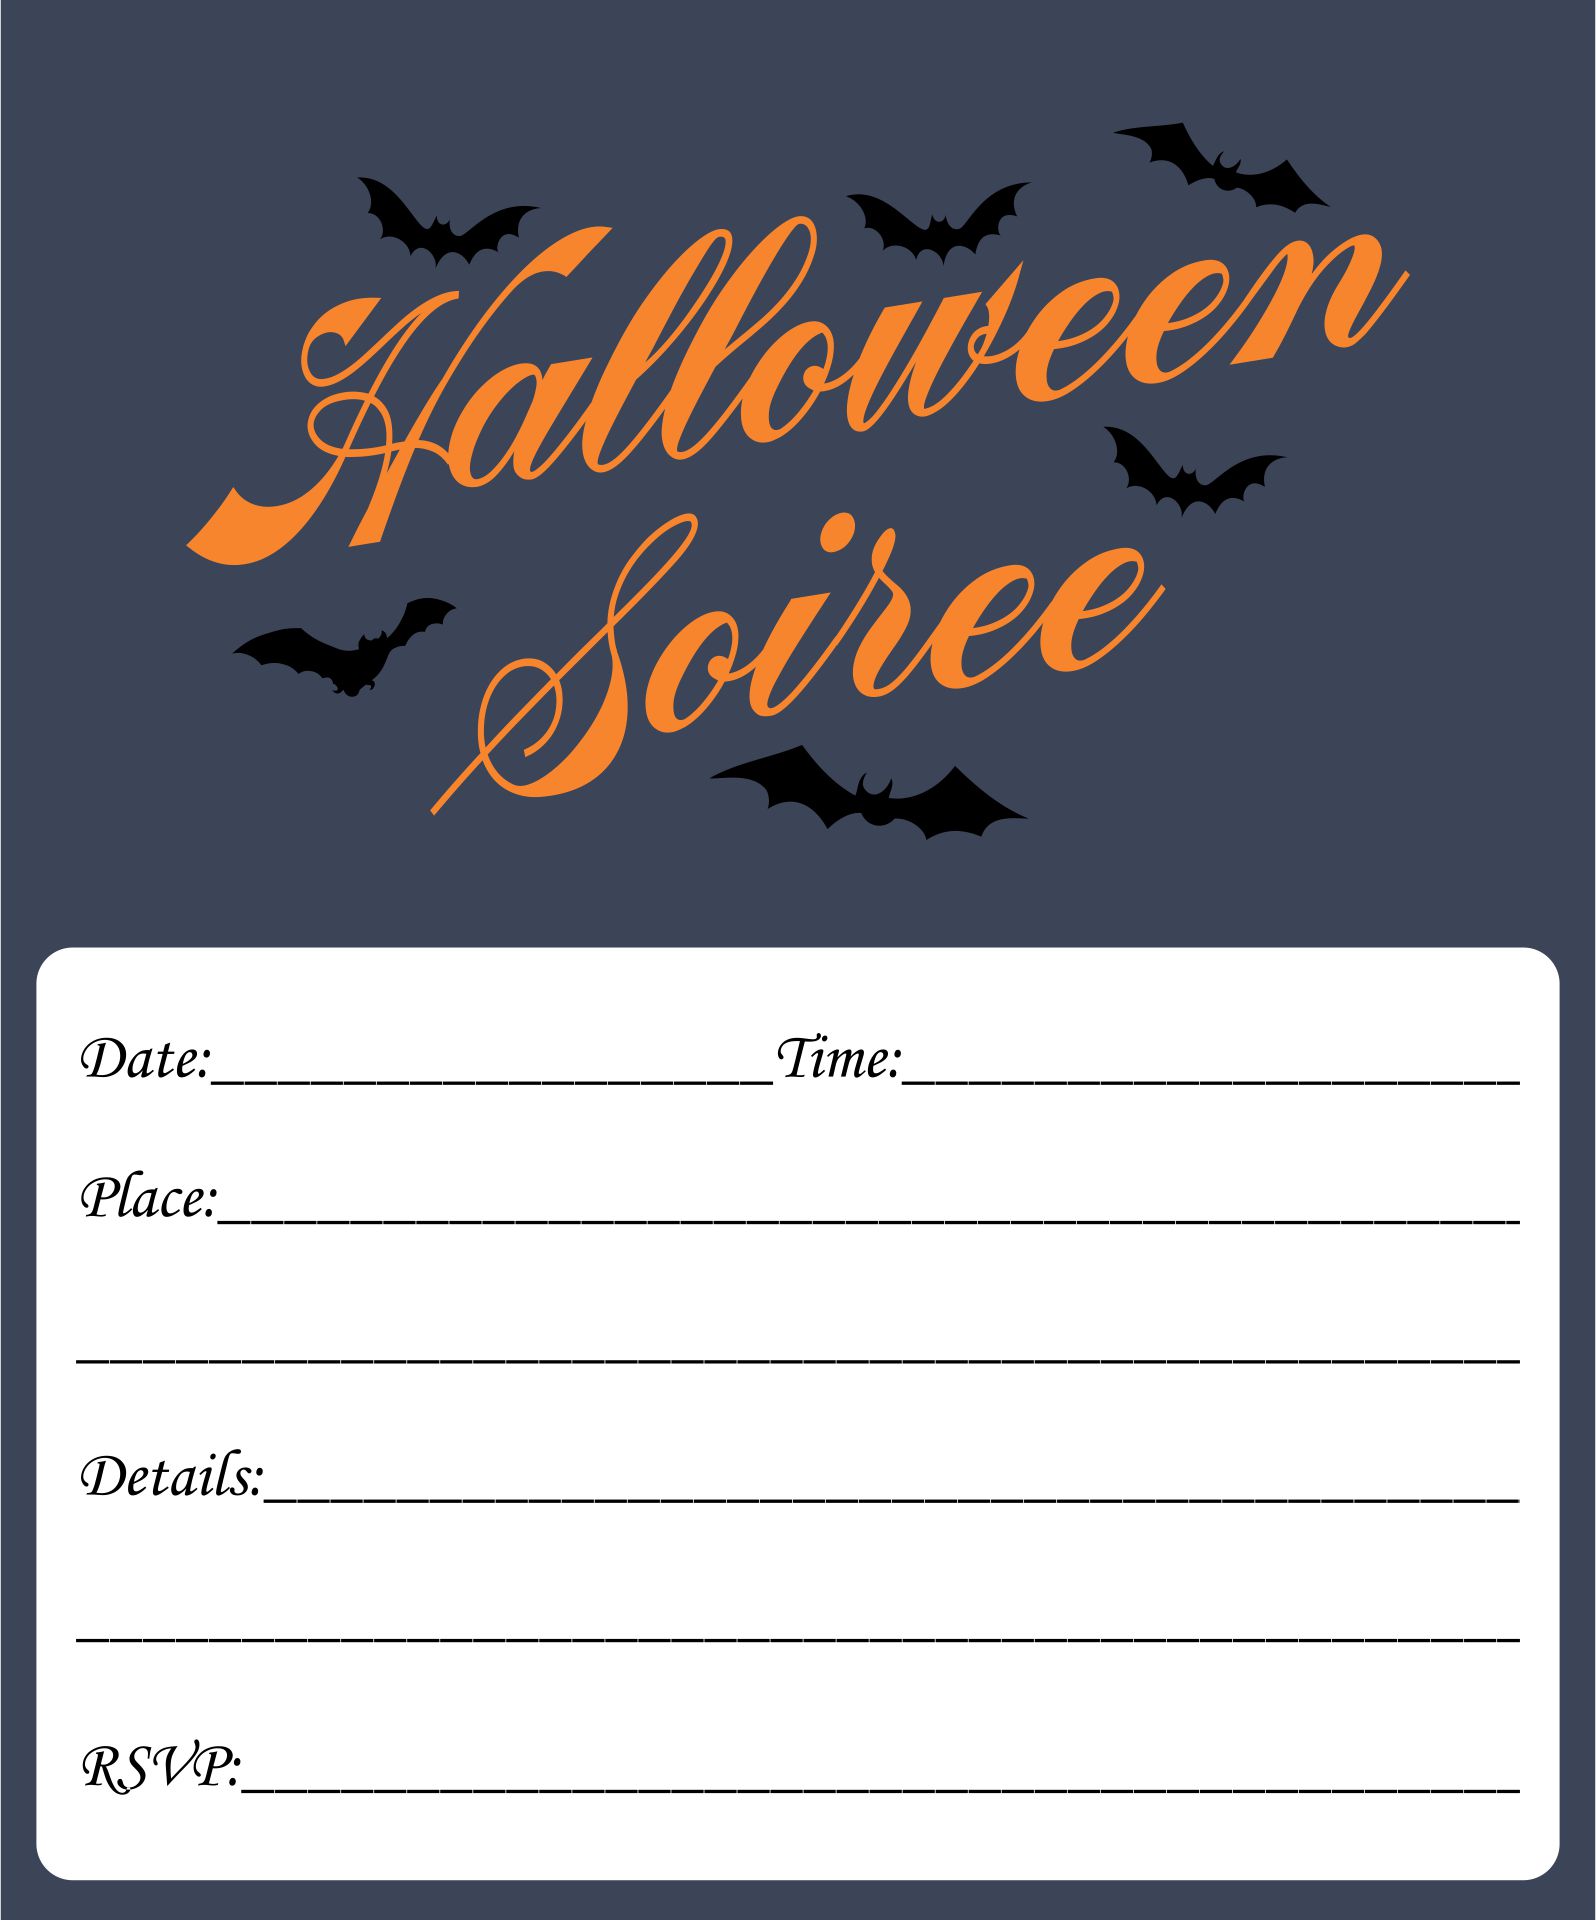 Free Printable Halloween Invitations For Your Spooky Soiree